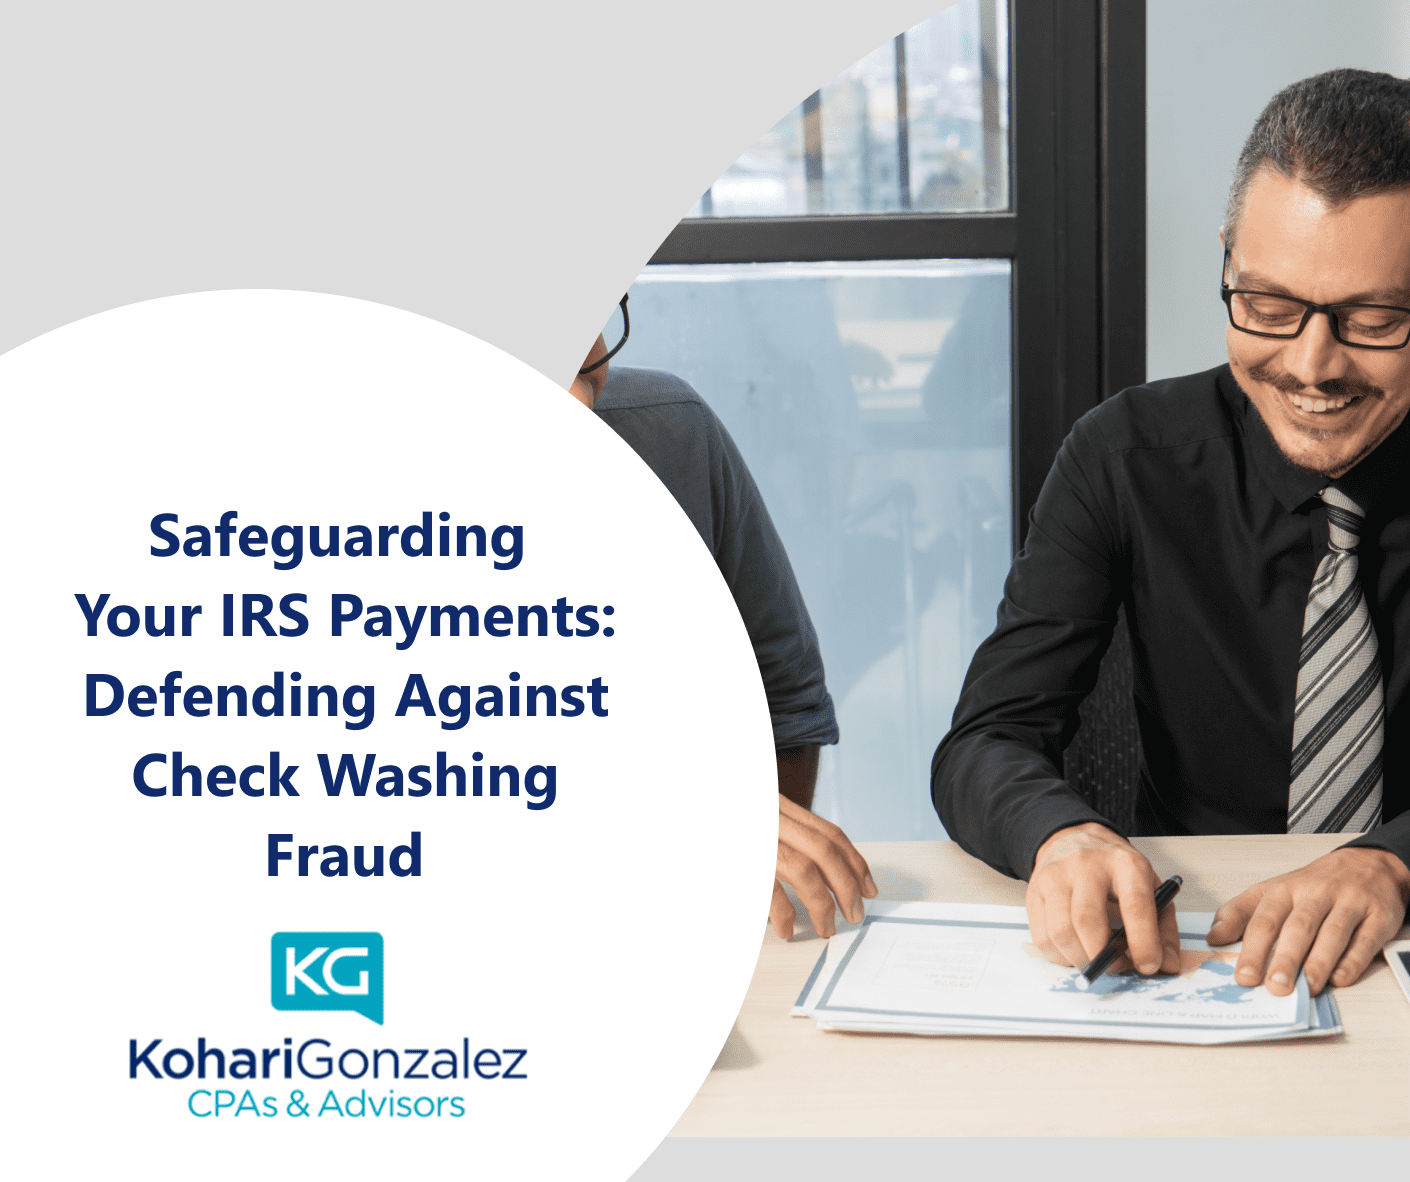 Safeguarding Your IRS Payments Defending Against Check Washing Fraud